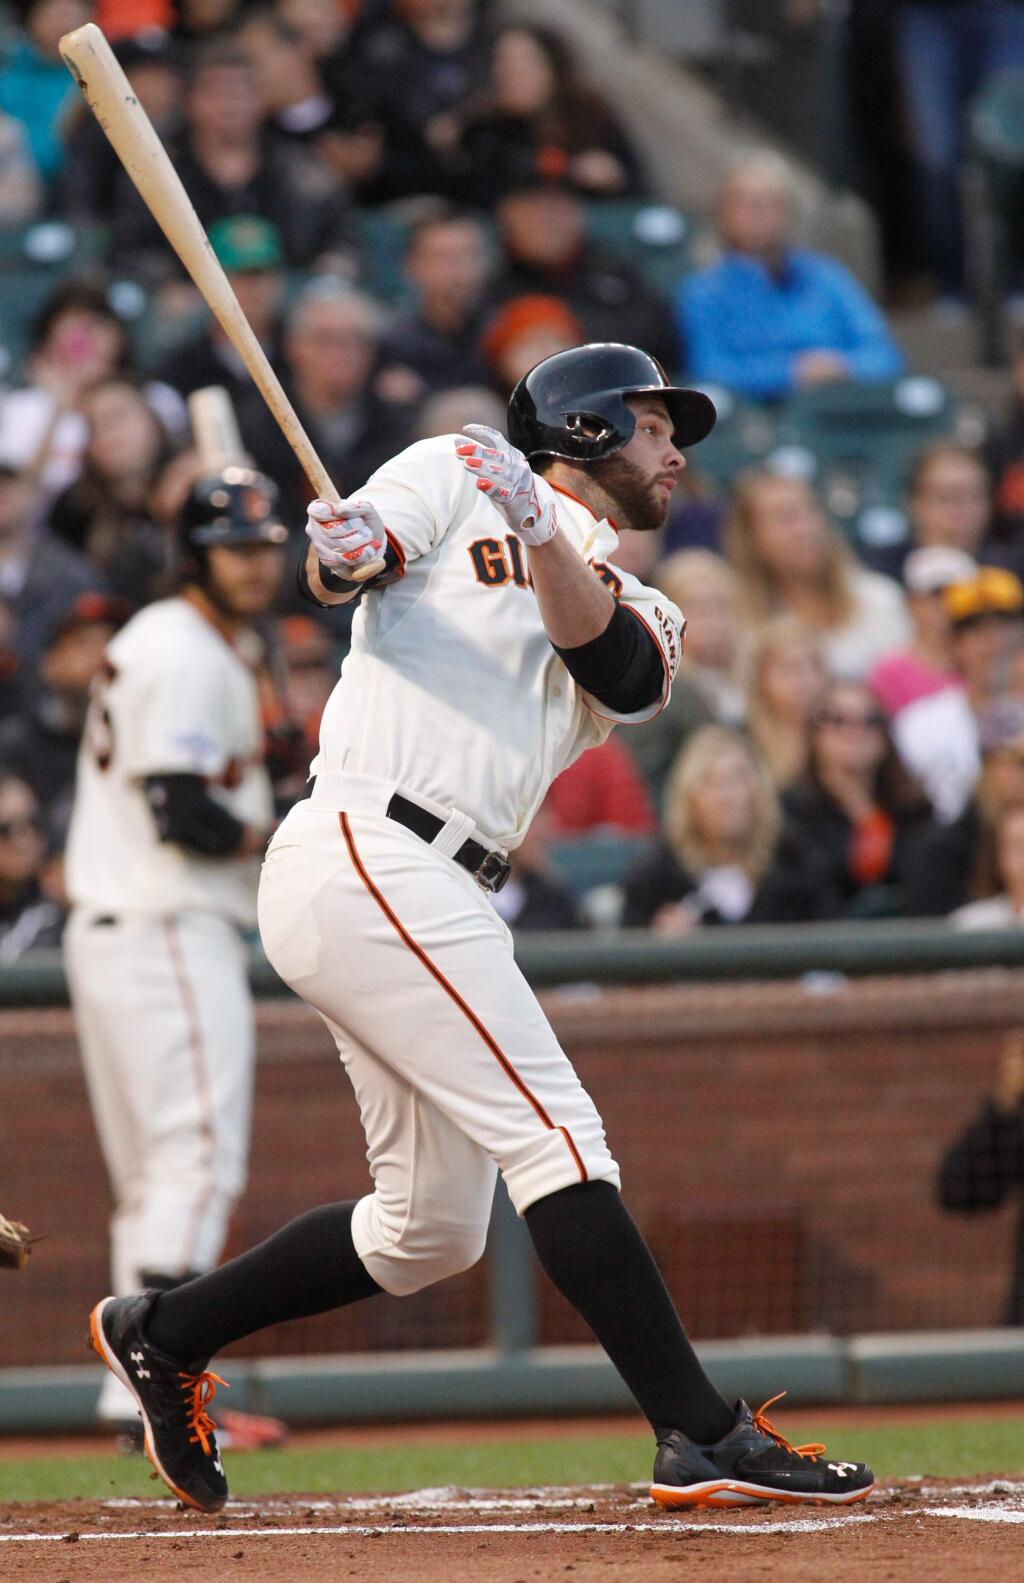 San Francisco Giants' Brandon Belt hits a double during the second inning of a baseball game against the San Diego Padres, Tuesday, May 5, 2015, in San Francisco. (AP Photo/Mathew Sumner)